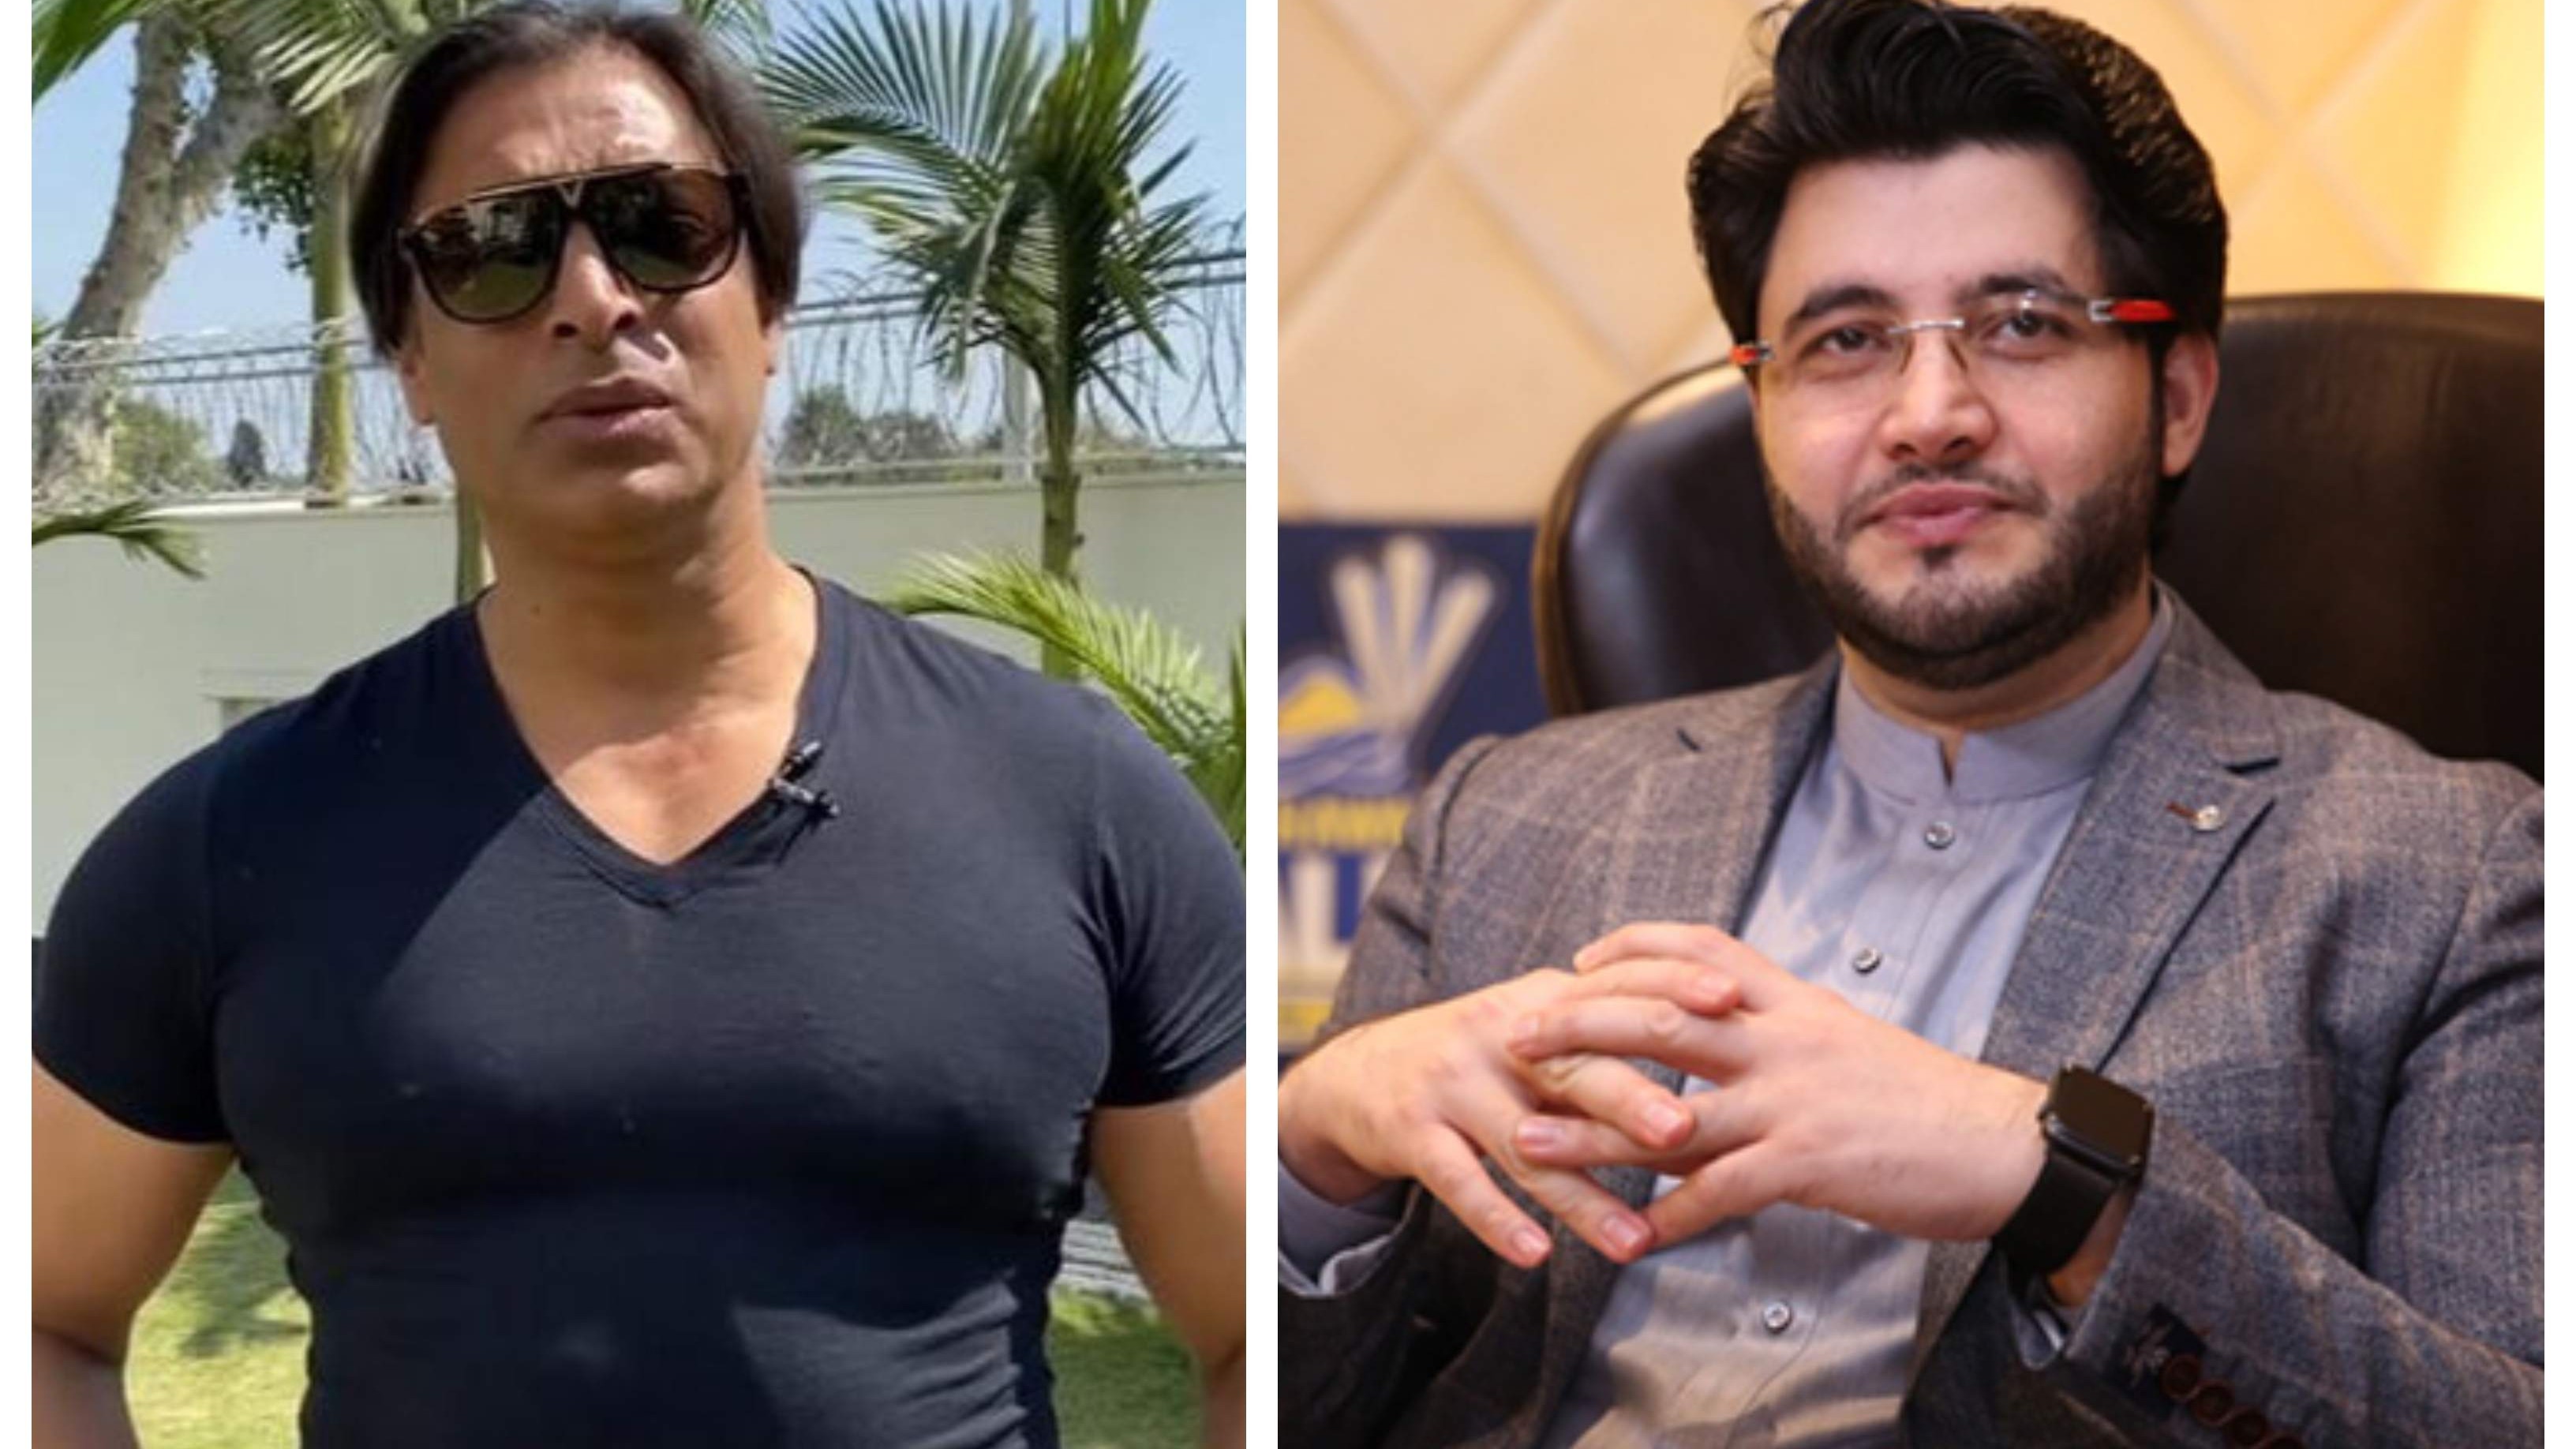 PSL 2020: Shoaib Akhtar slams Zalmi owner for wanting to continue PSL 5 despite COVID-19 outbreak